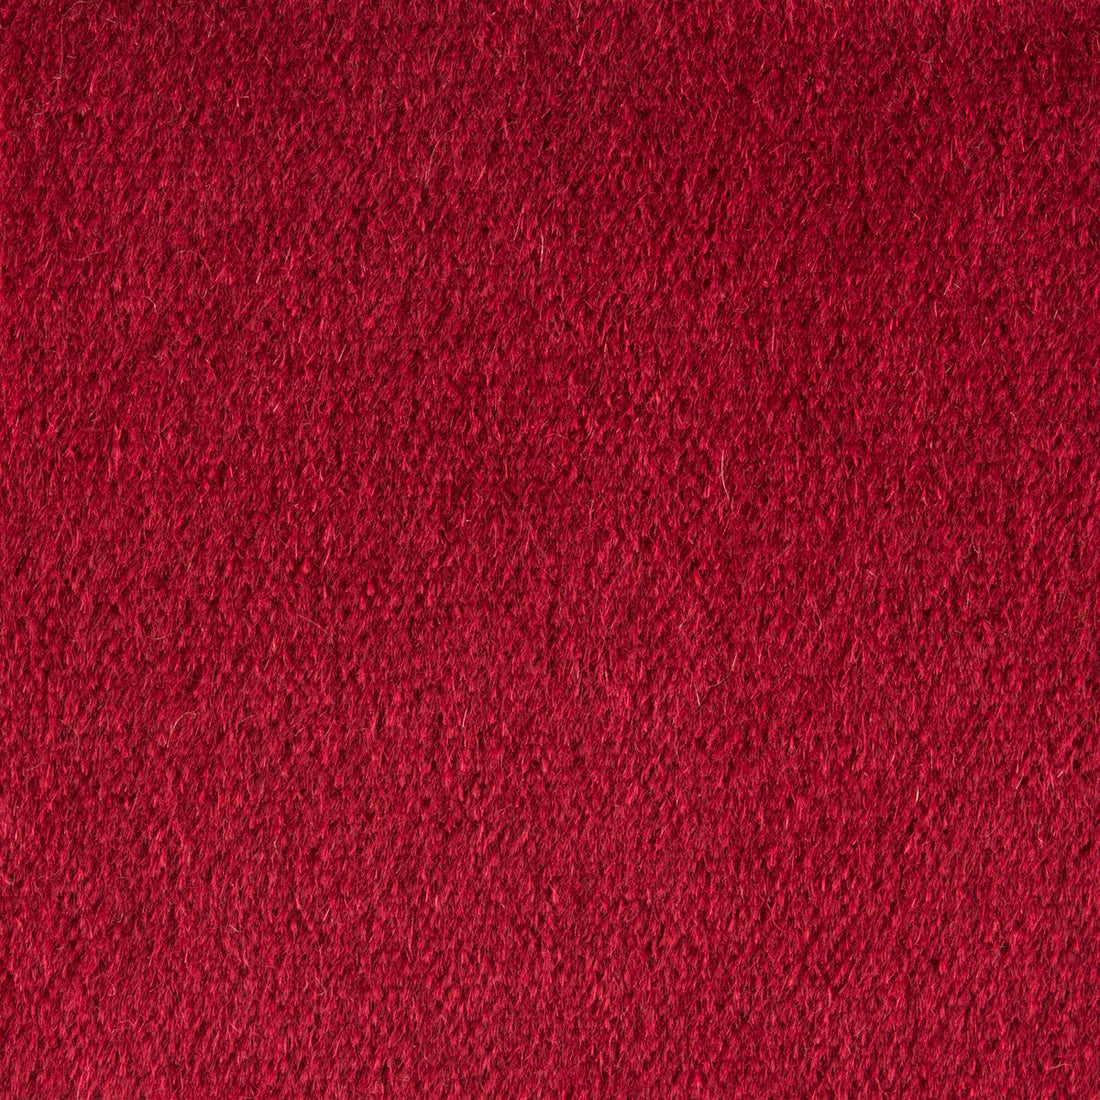 Autun Mohair Velvet fabric in berry color - pattern BR-89778.140.0 - by Brunschwig &amp; Fils